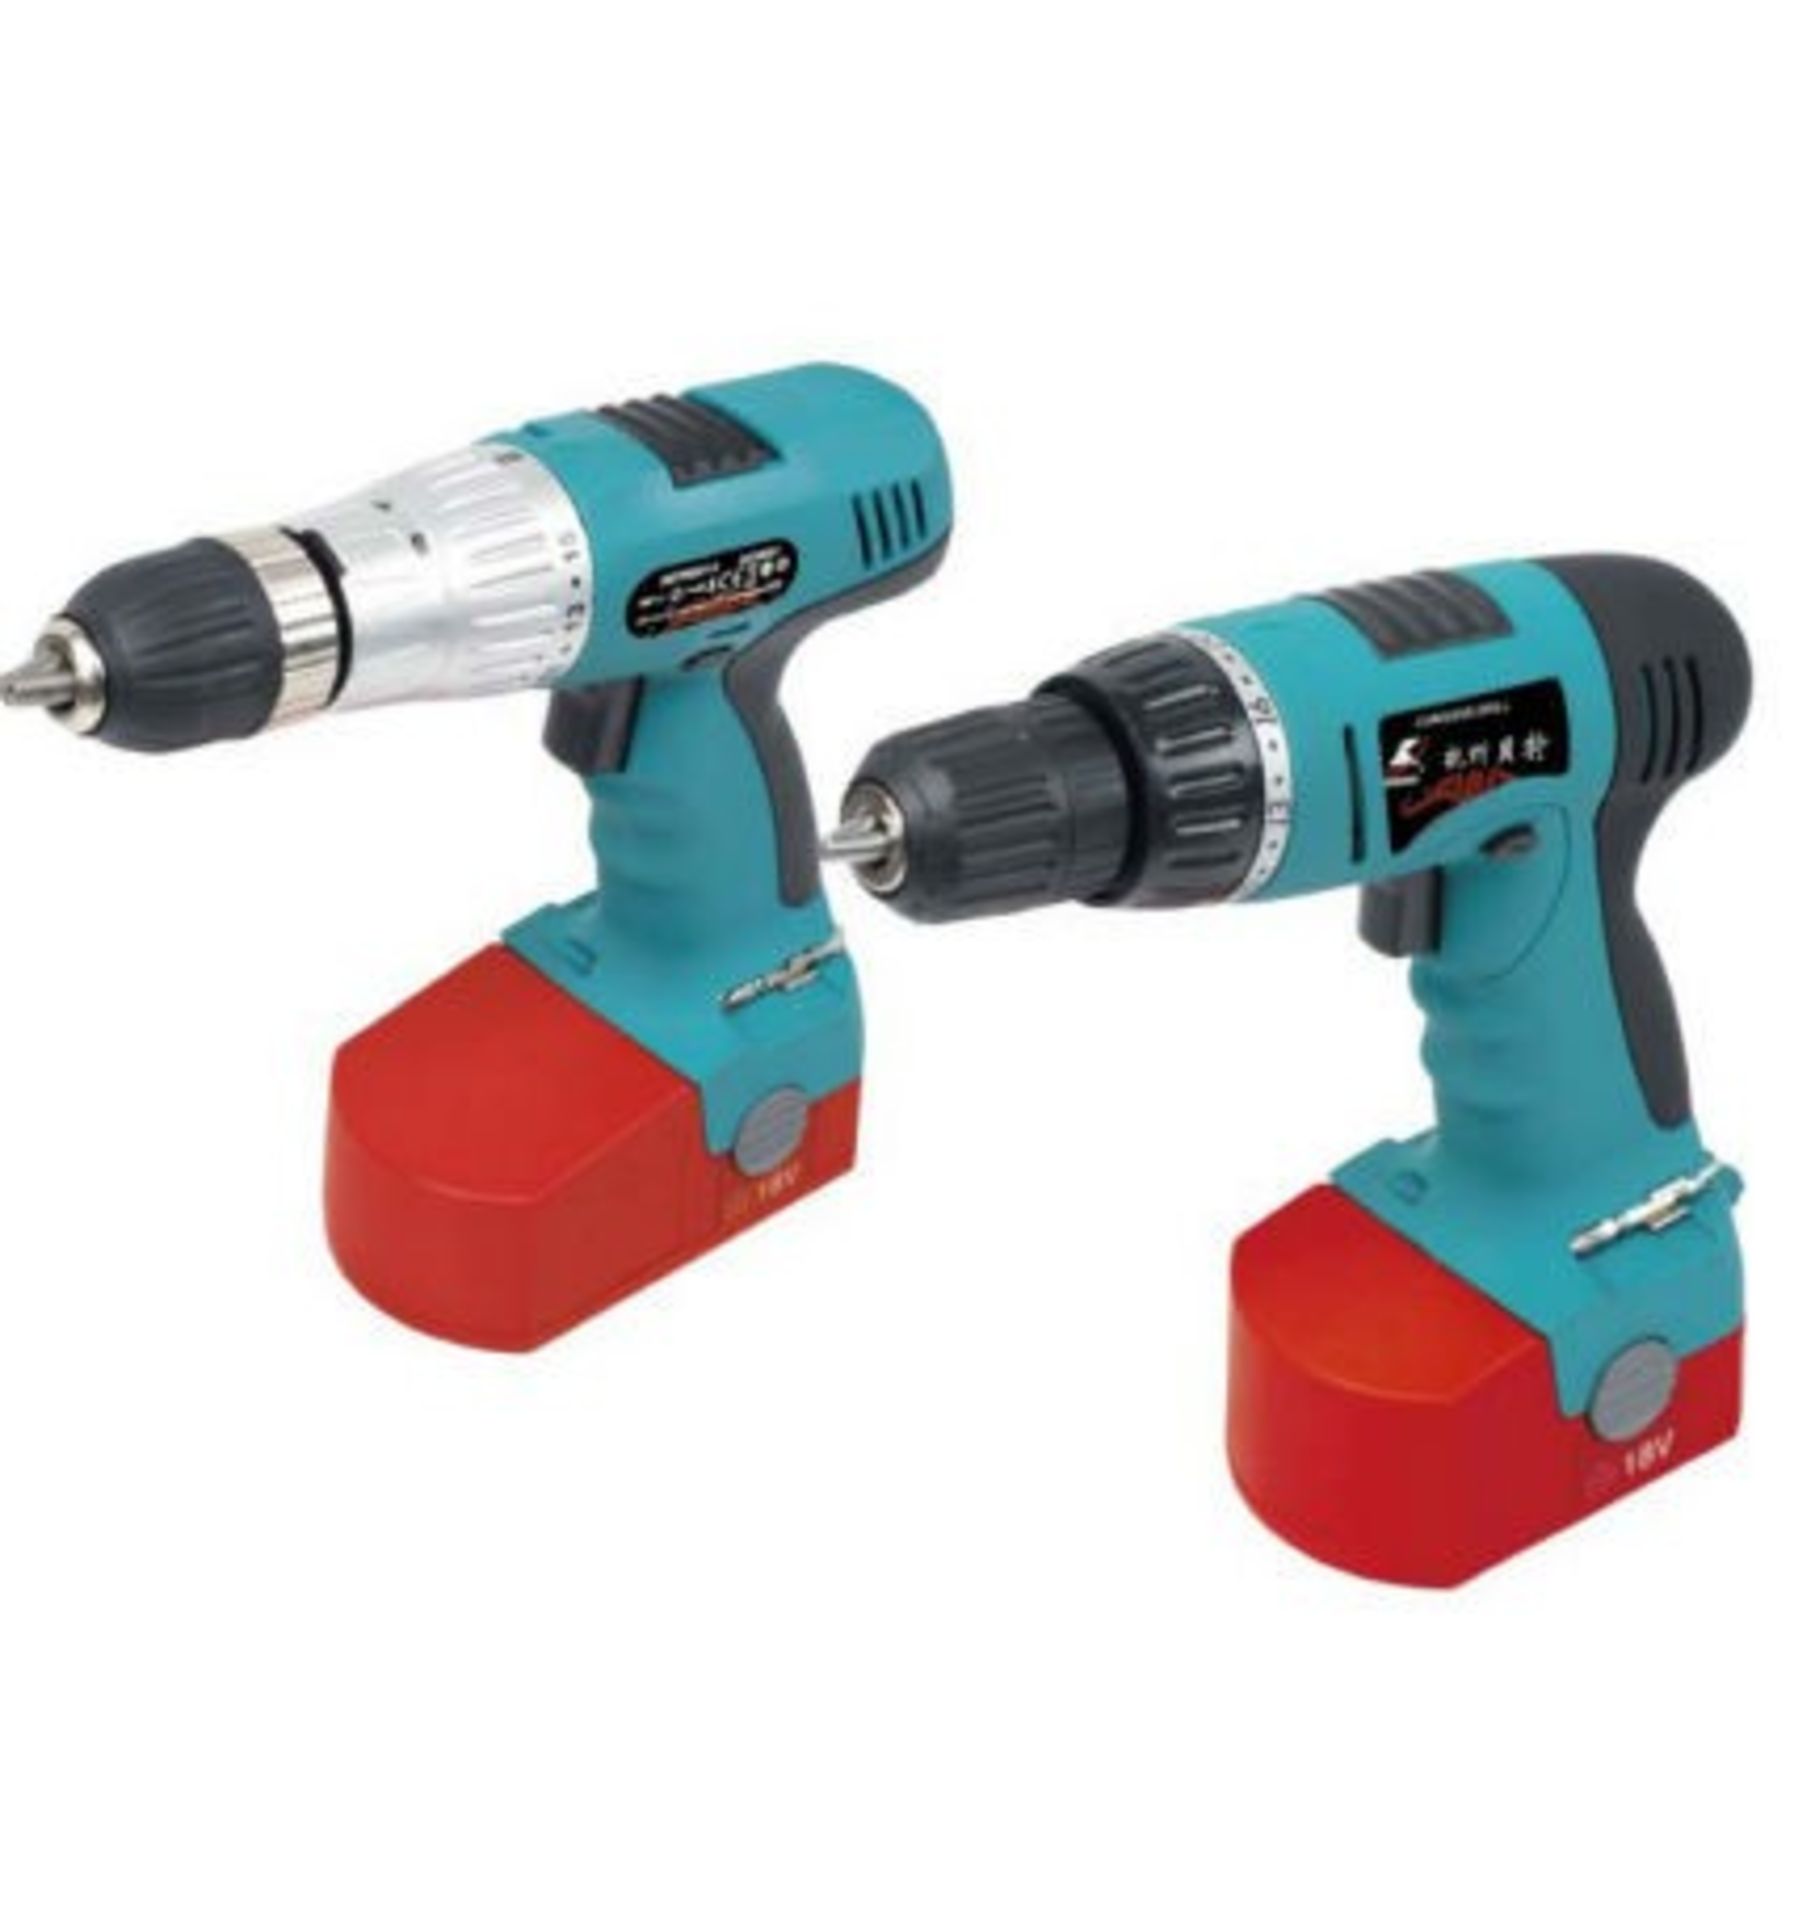 V Brand New 18V Twin Drill Kit with Hammer Action and Torque Adjustment - with 15 Asssorted Drill